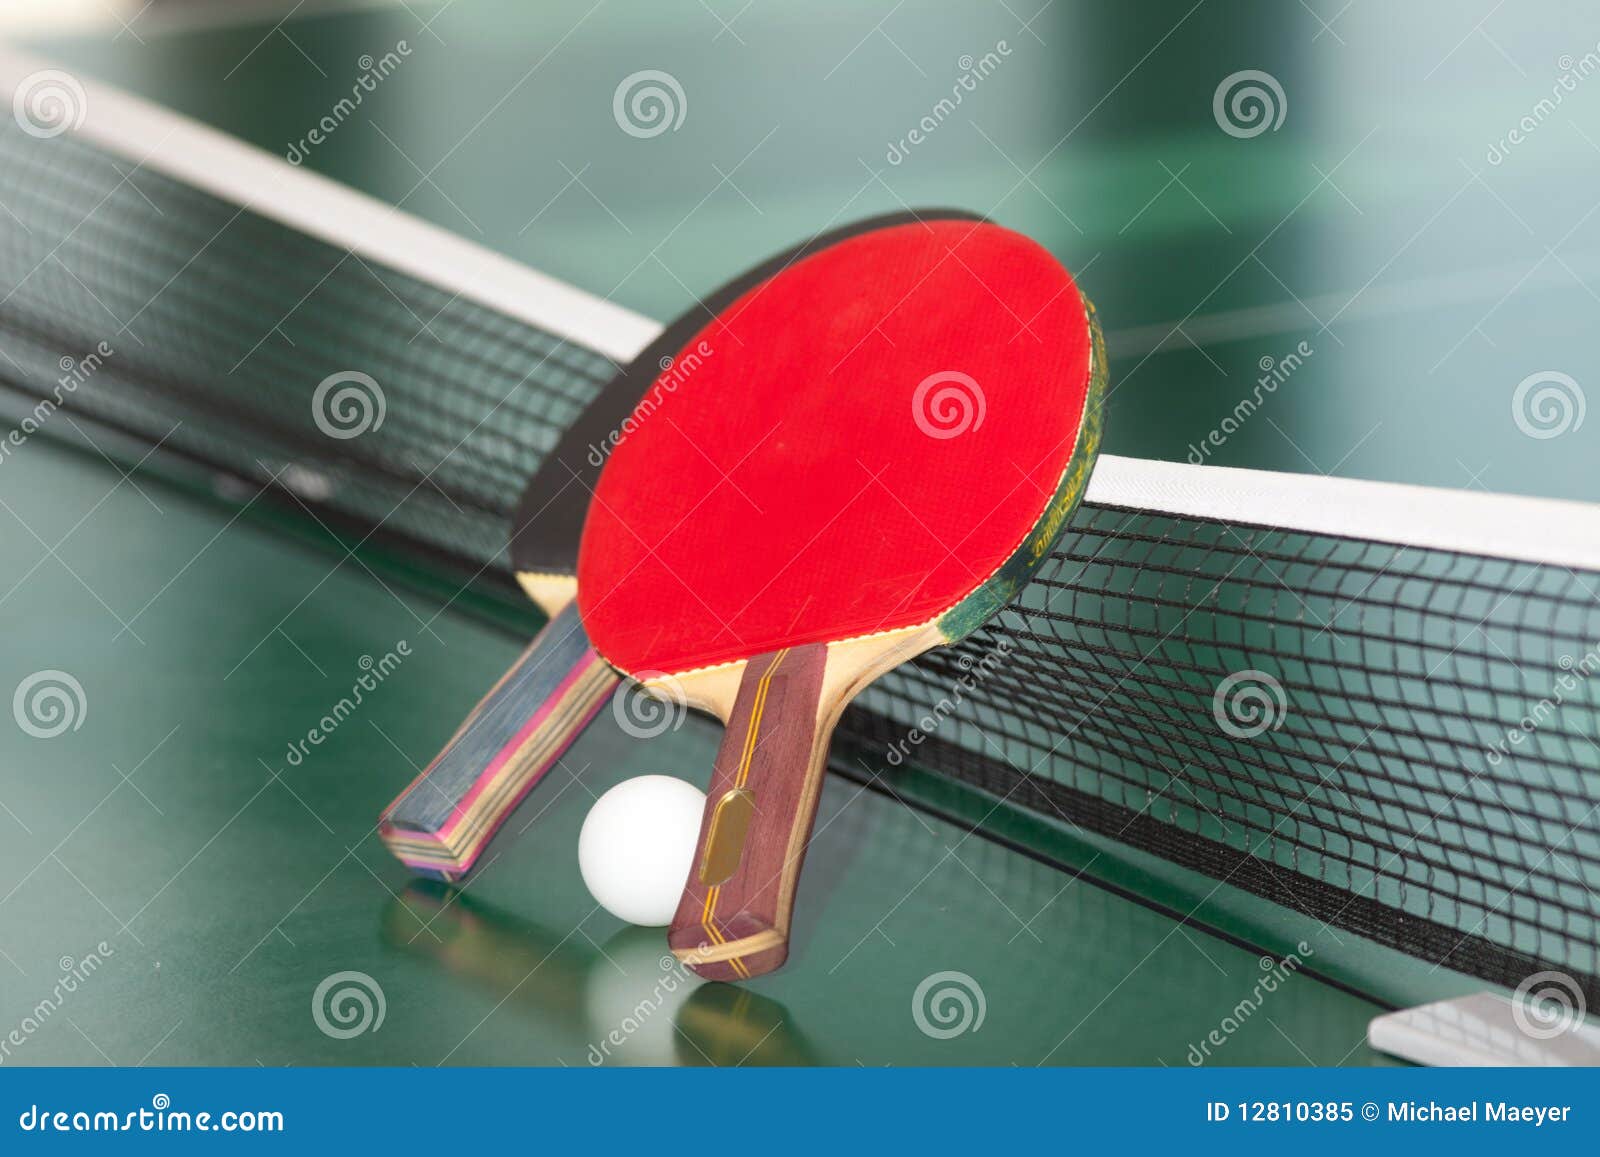 Table tennis rackets and ball. Two table tennis or ping pong rackets and balls on a green table with net